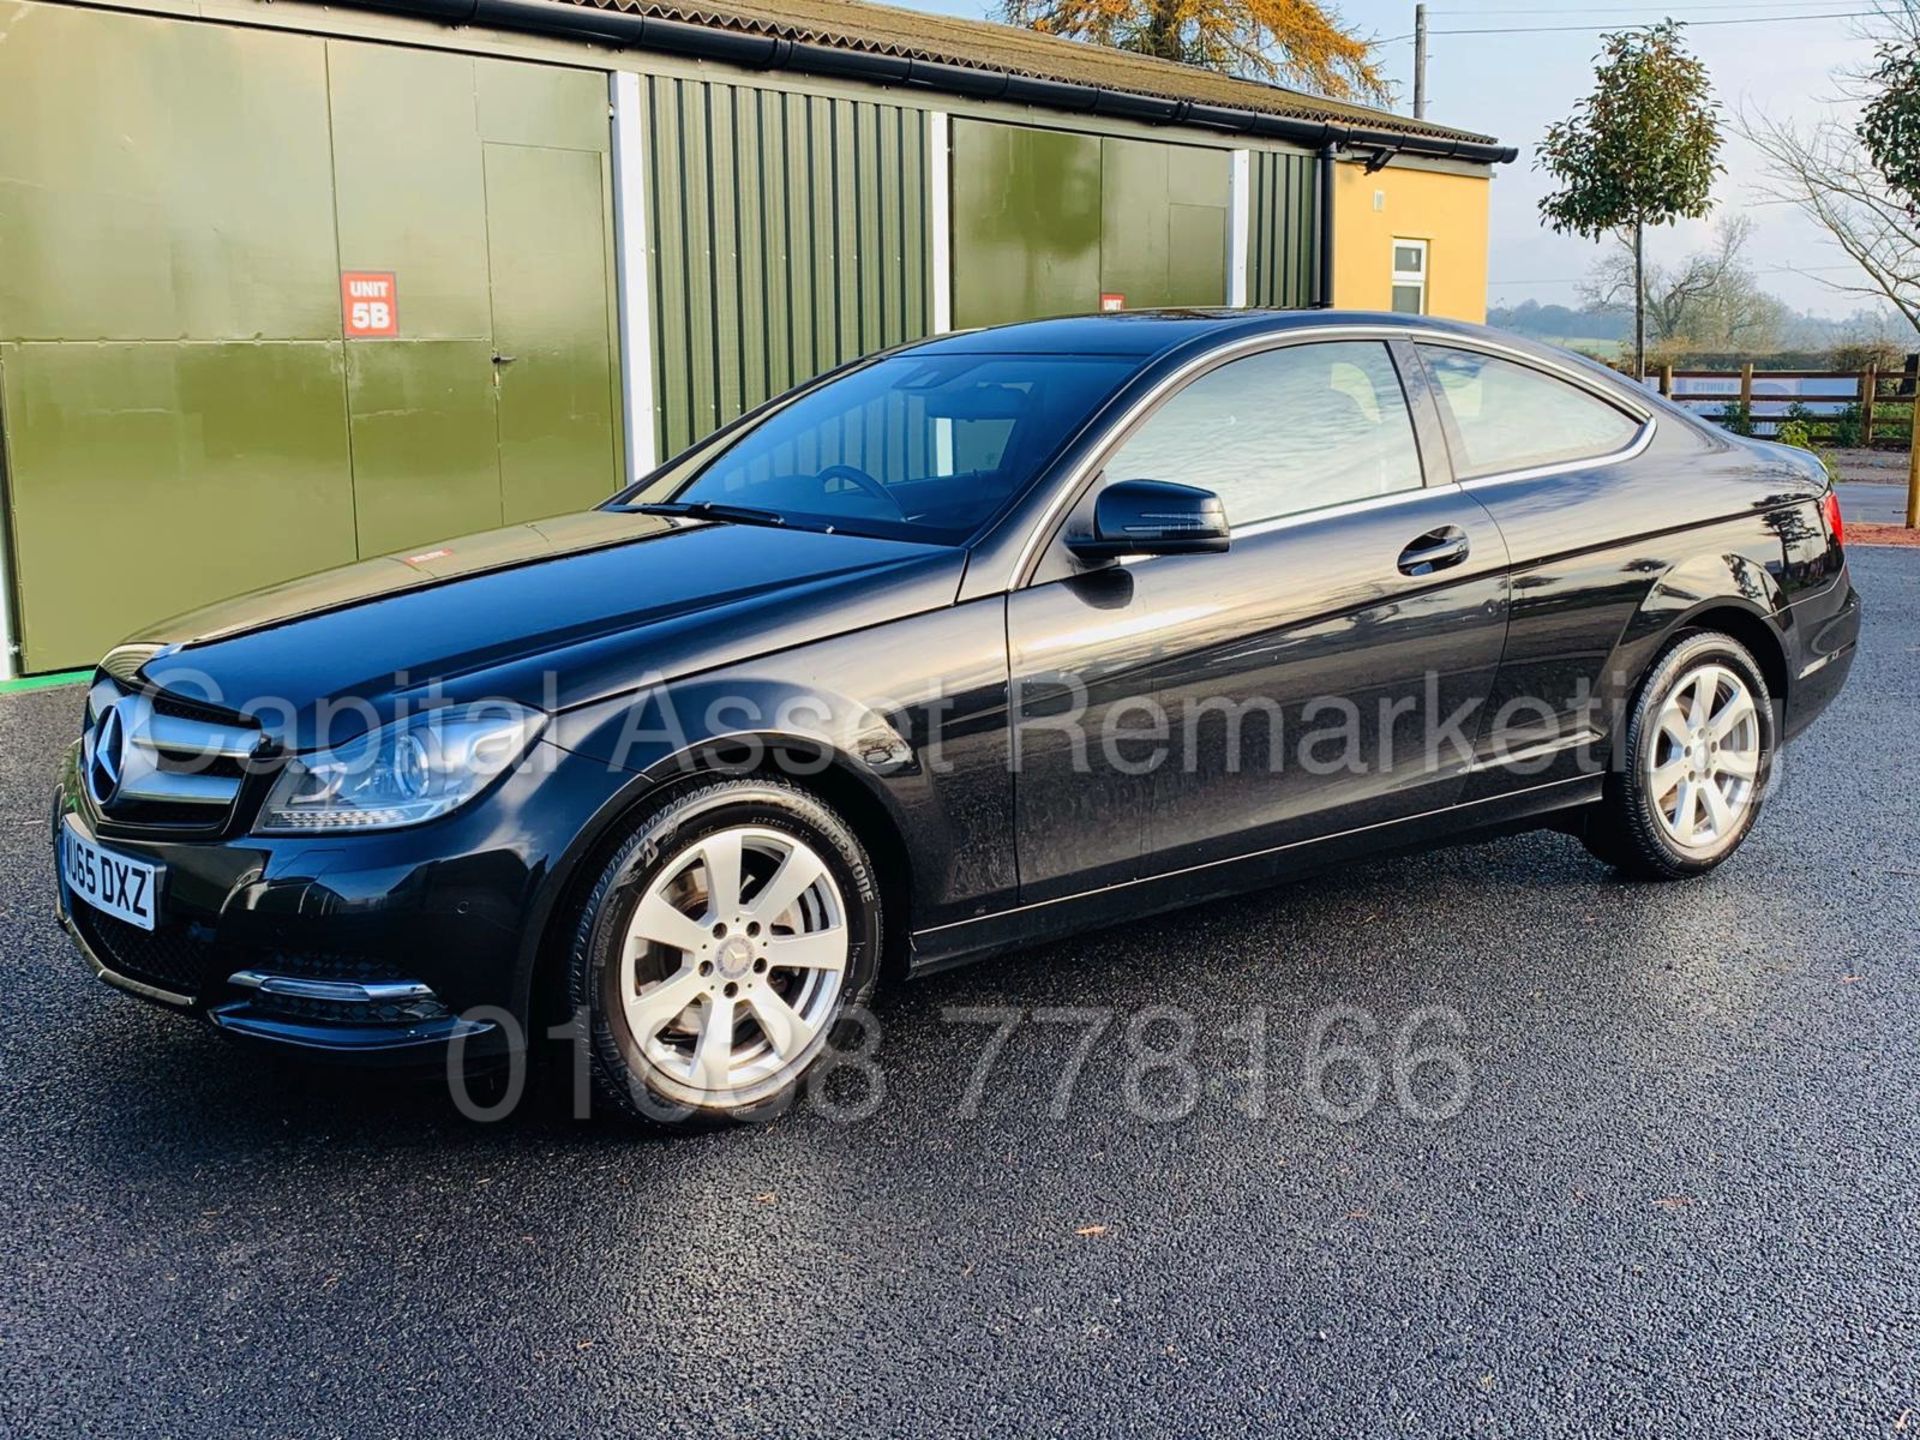 (On Sale) MERCEDES-BENZ C220 CDI *EXECUTIVE* COUPE VERSION (65 REG) **MASSIVE SPEC** (FULL HISTORY) - Image 5 of 42